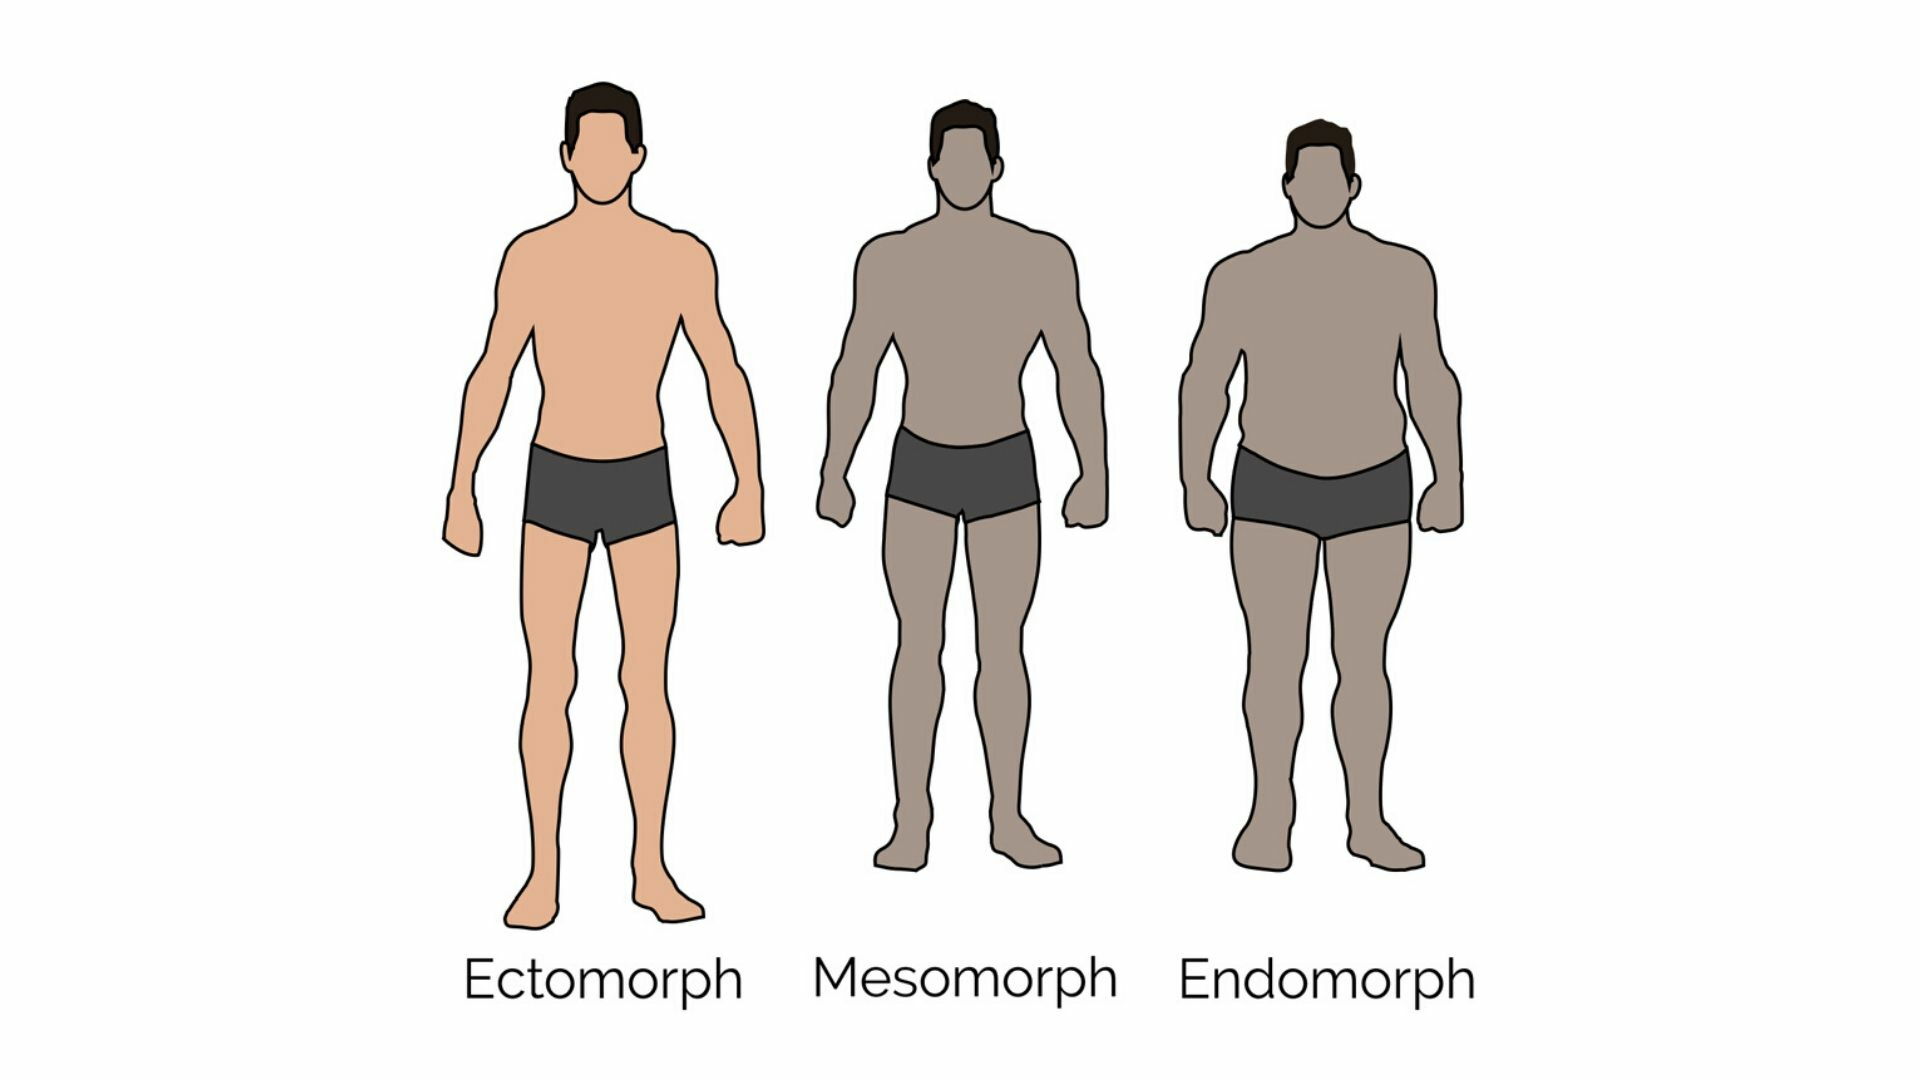 What is the science behind the ectomorph, mesomorph and endomorph  bodytypes, if there is any? - Quora